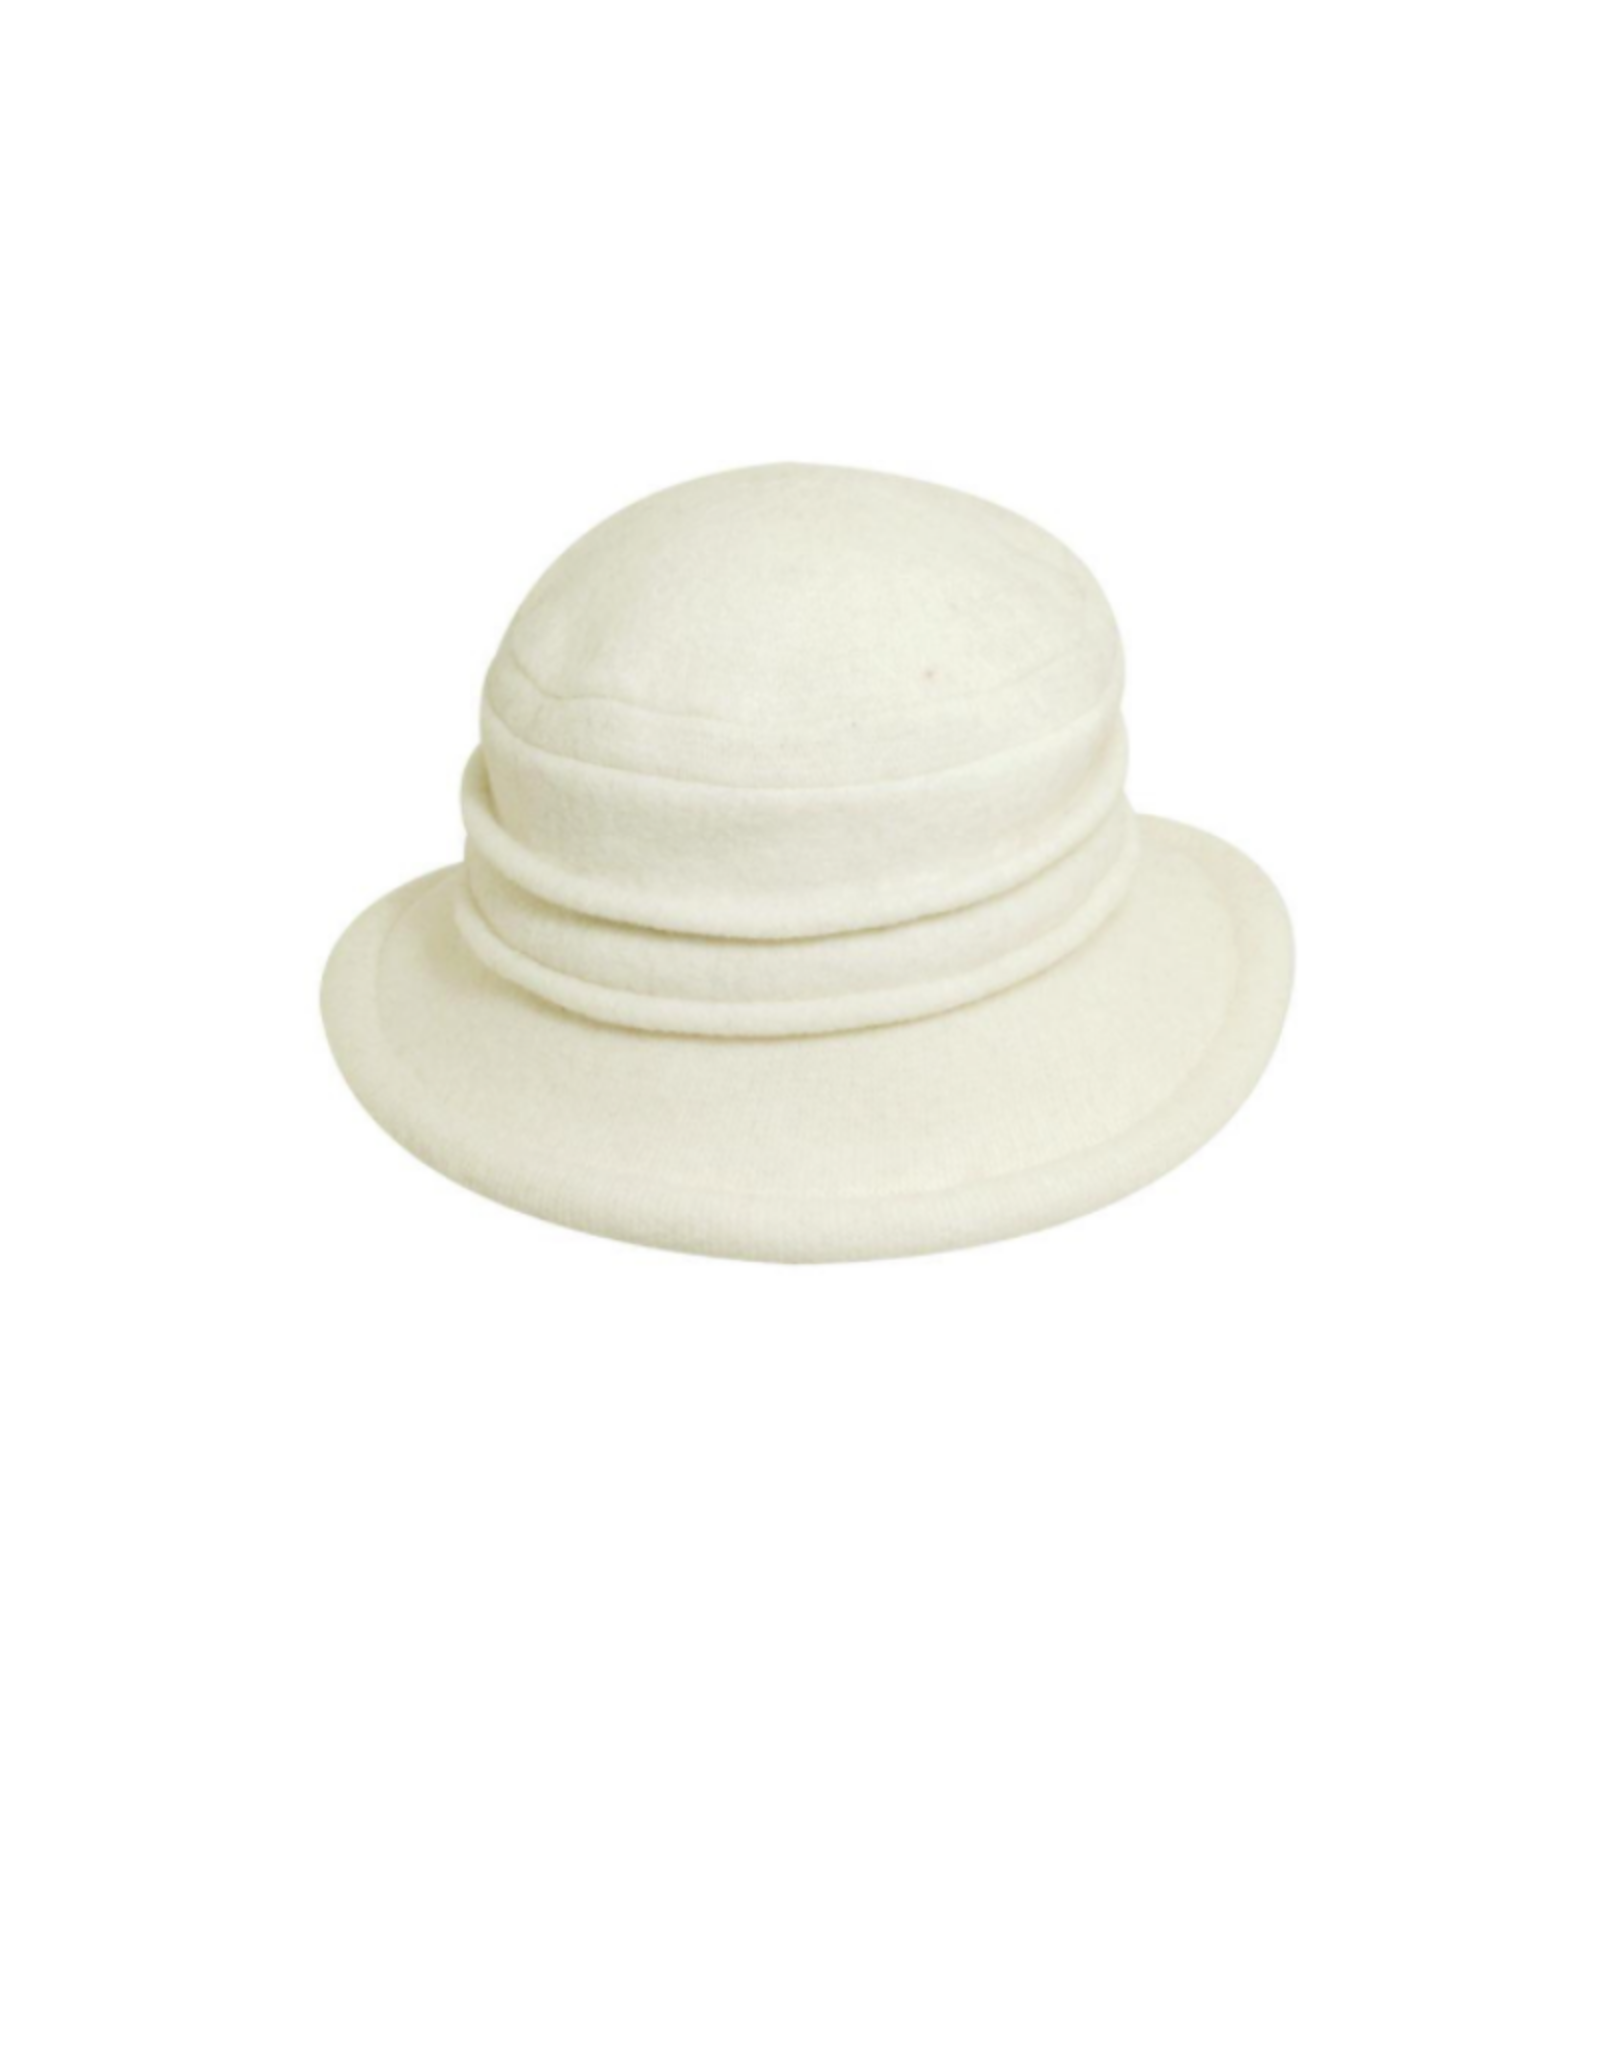 HAT-CLOCHE-BOILED WOOL "TULA"